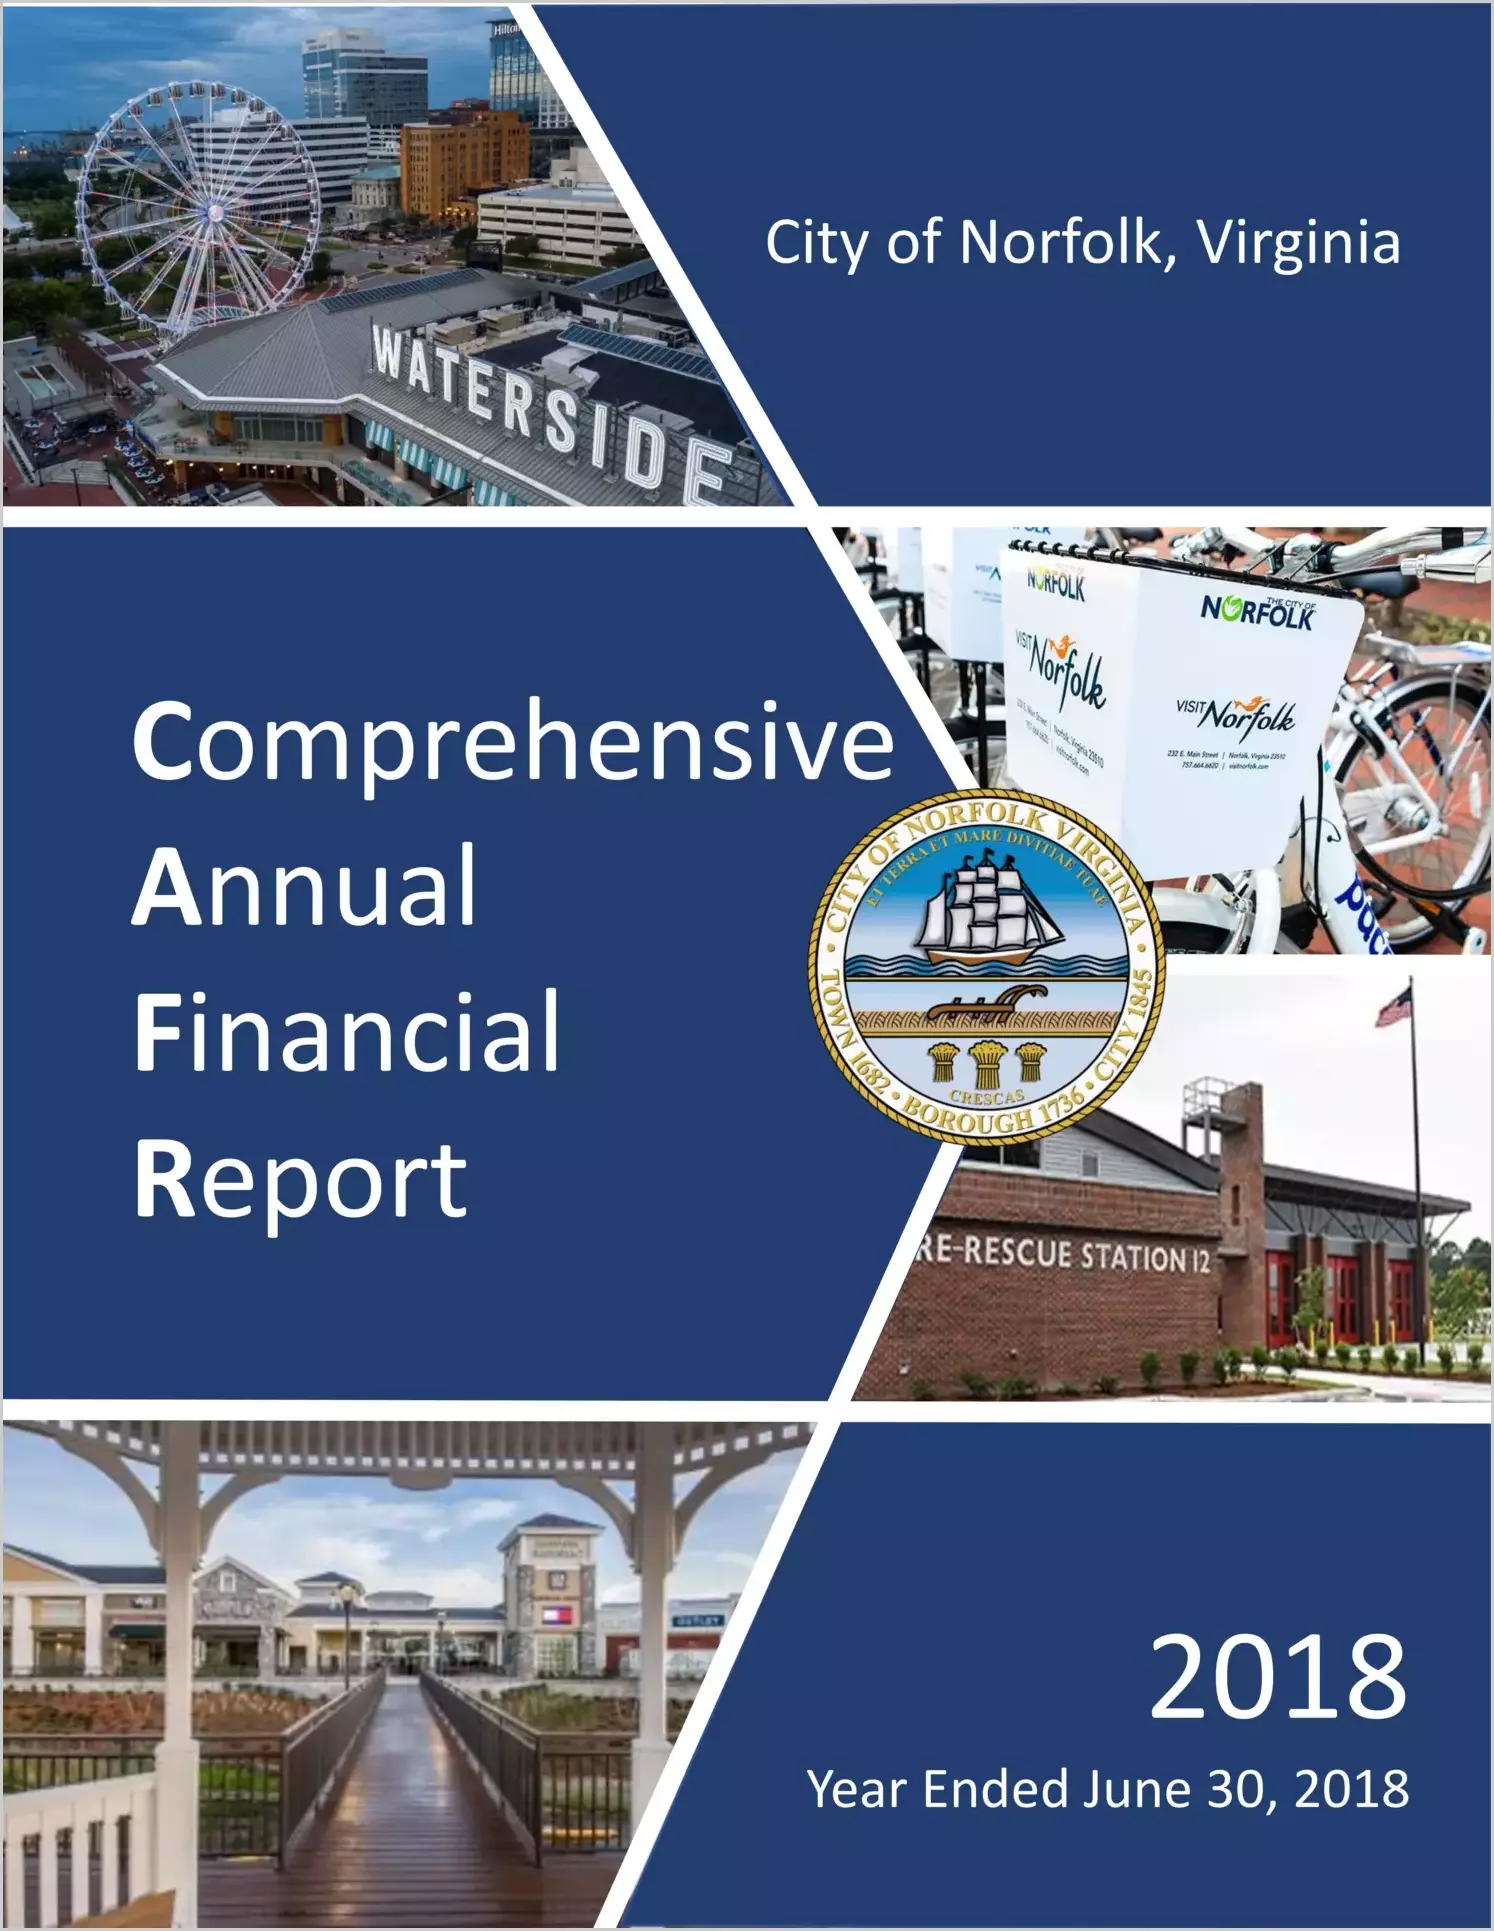 2018 Annual Financial Report for City of Norfolk